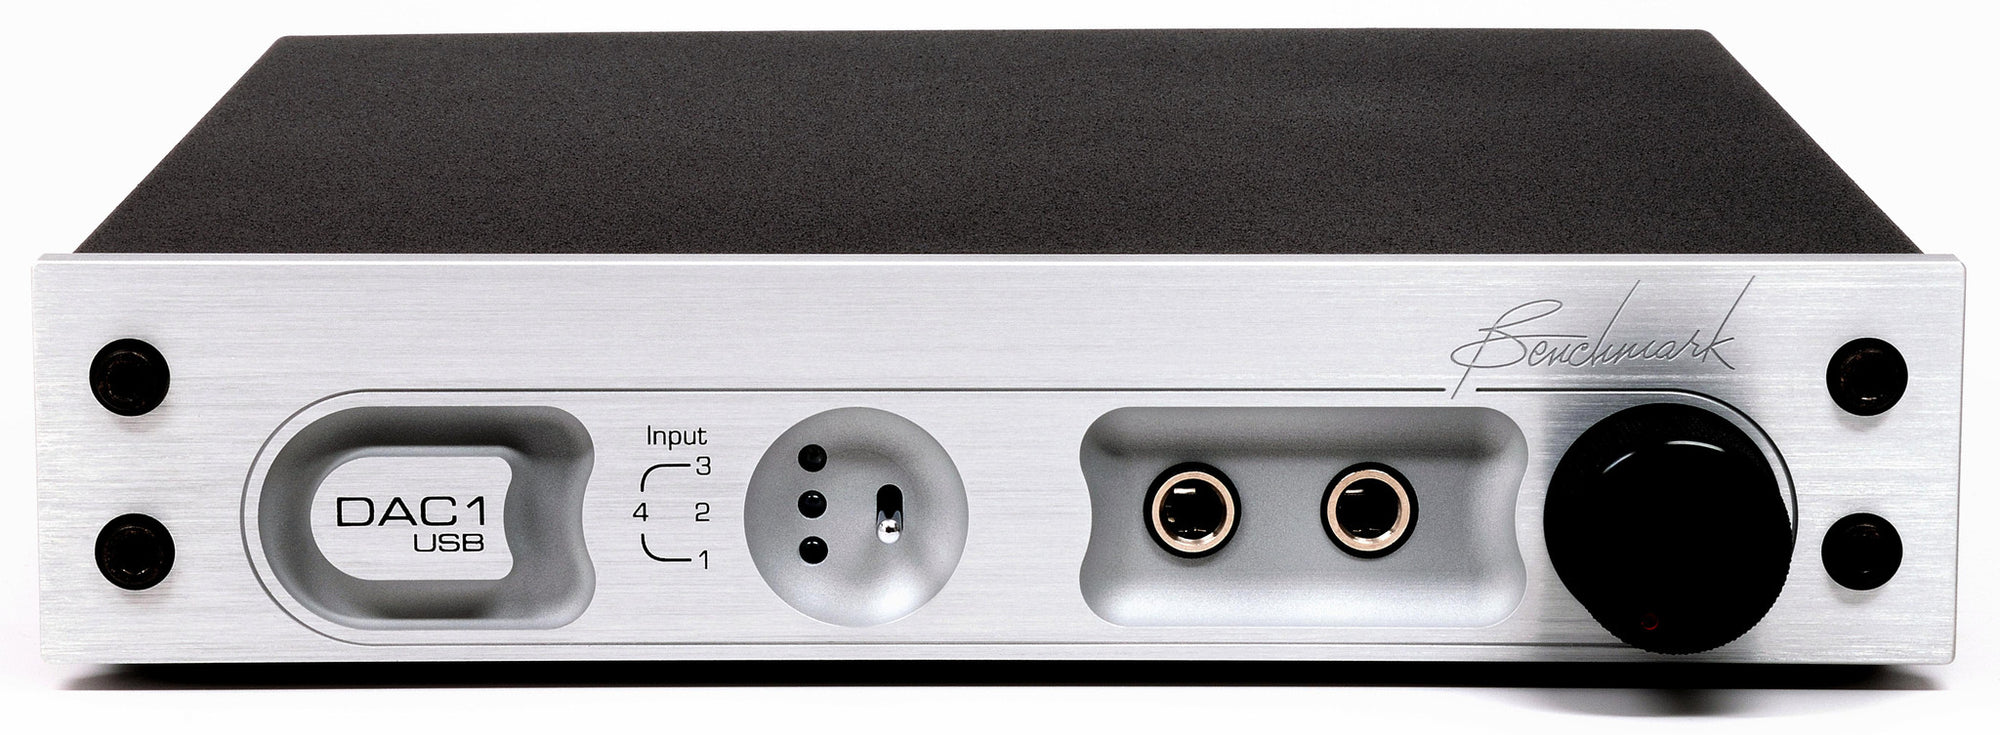 Benchmark DAC1 USB Silver front